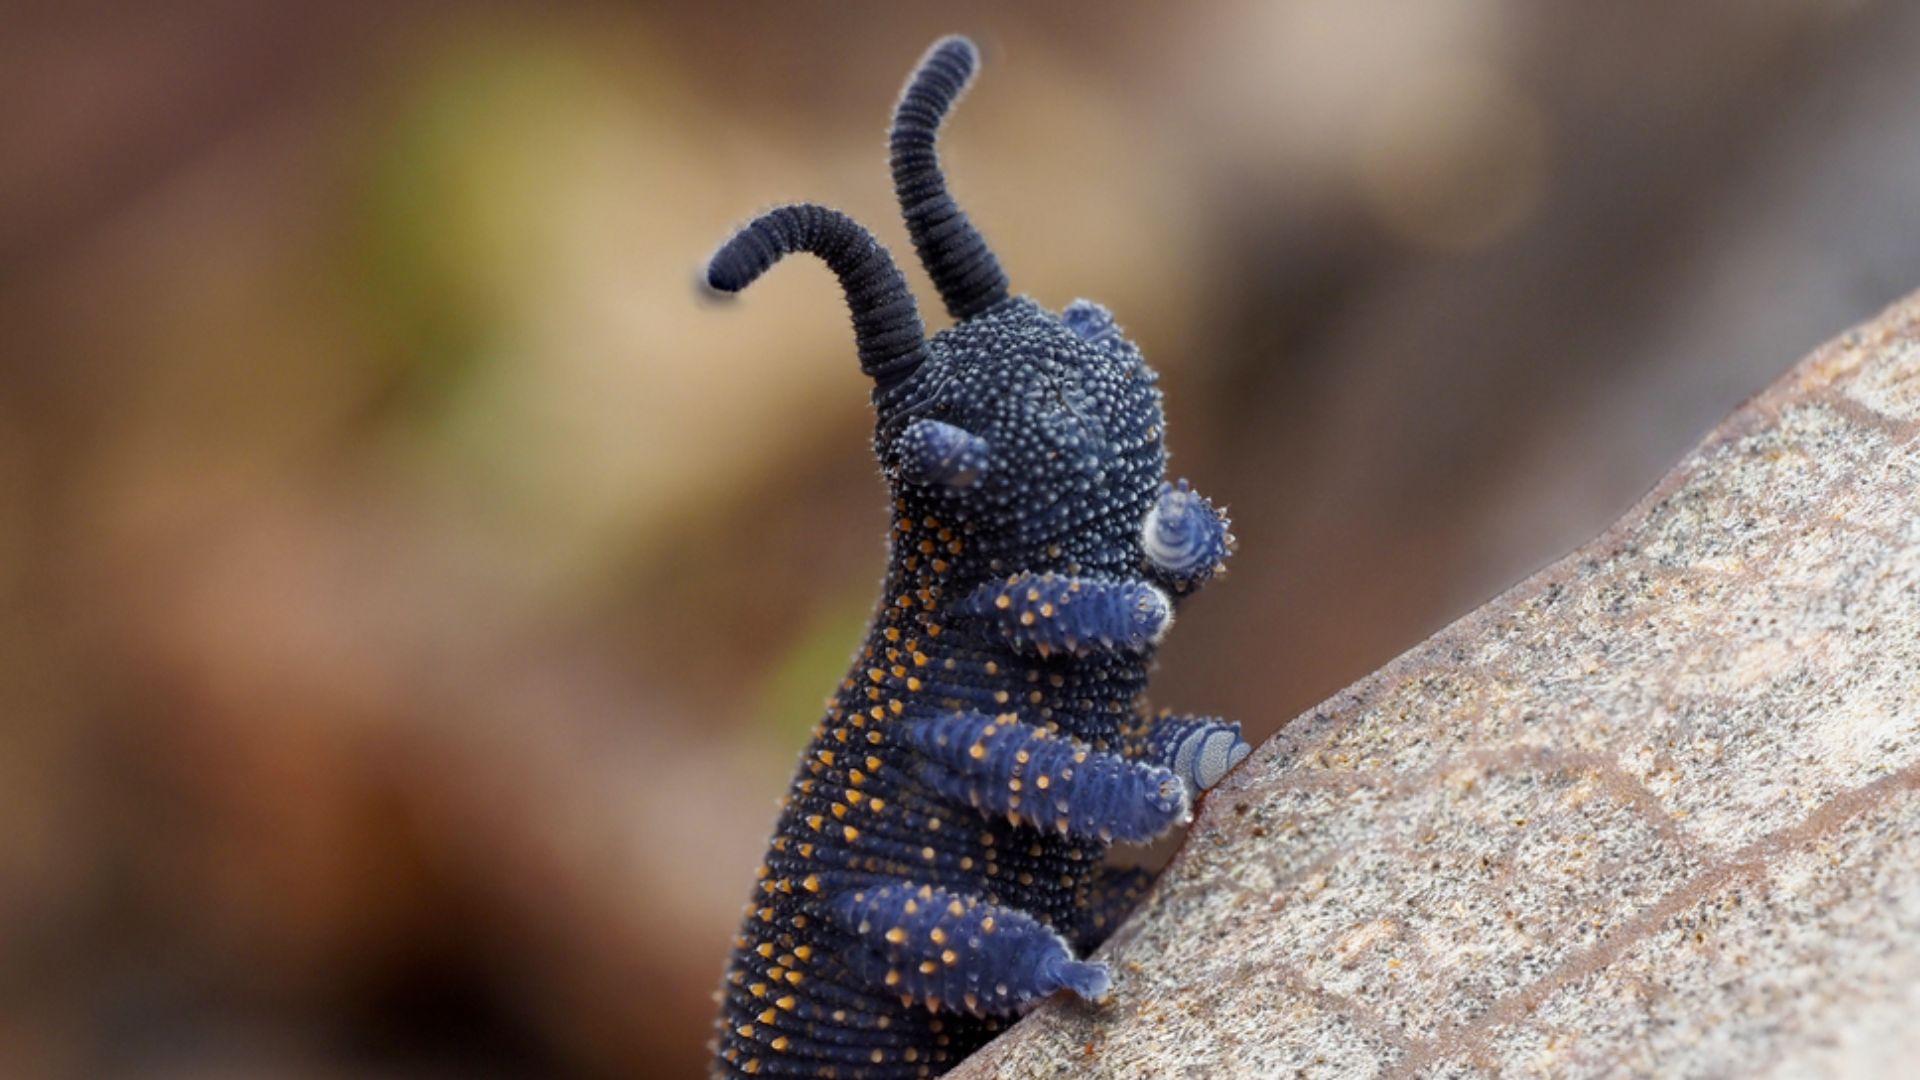 A velvet worm rearing its head up.